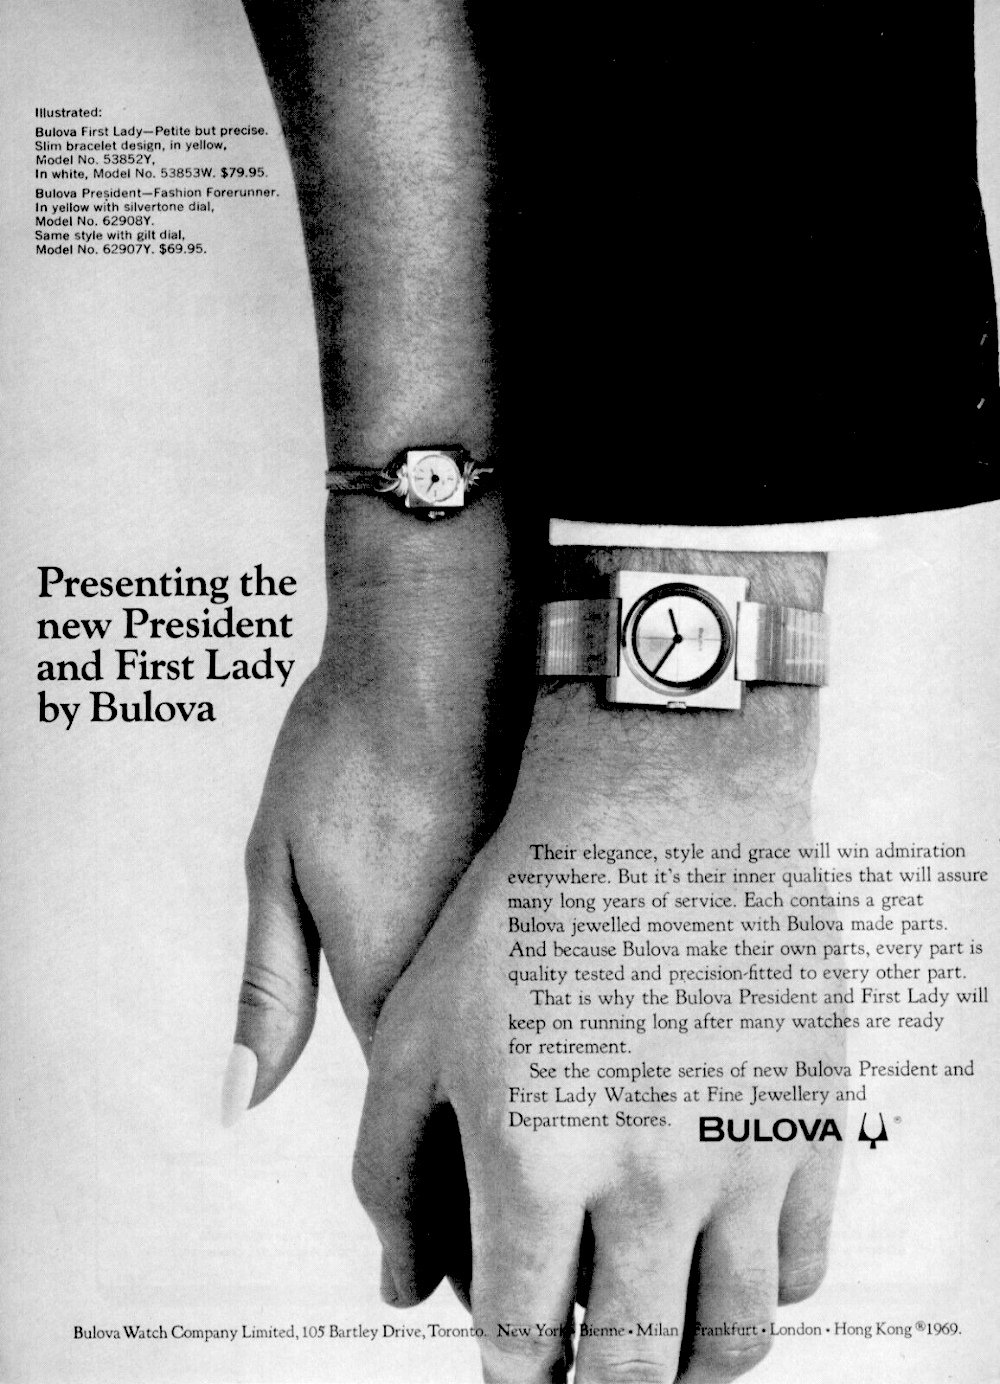 1969 Bulova President and First Lady watches